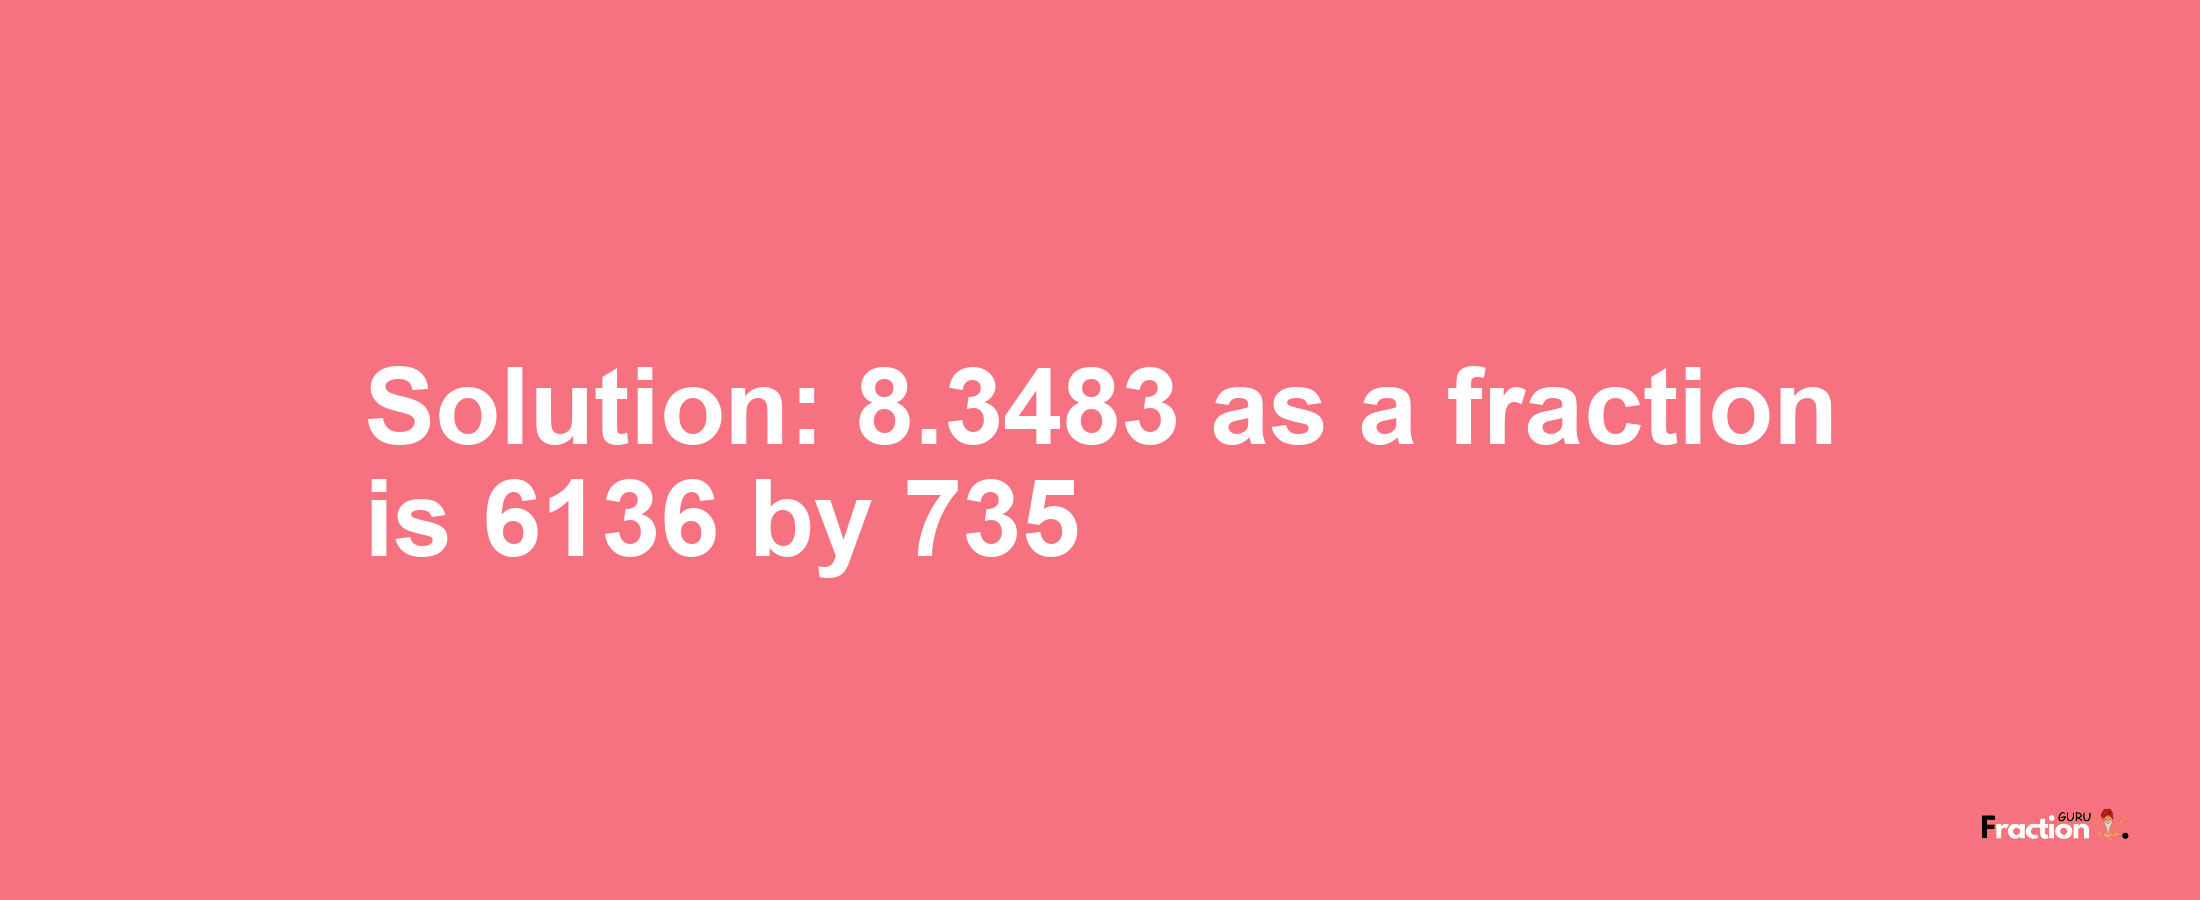 Solution:8.3483 as a fraction is 6136/735